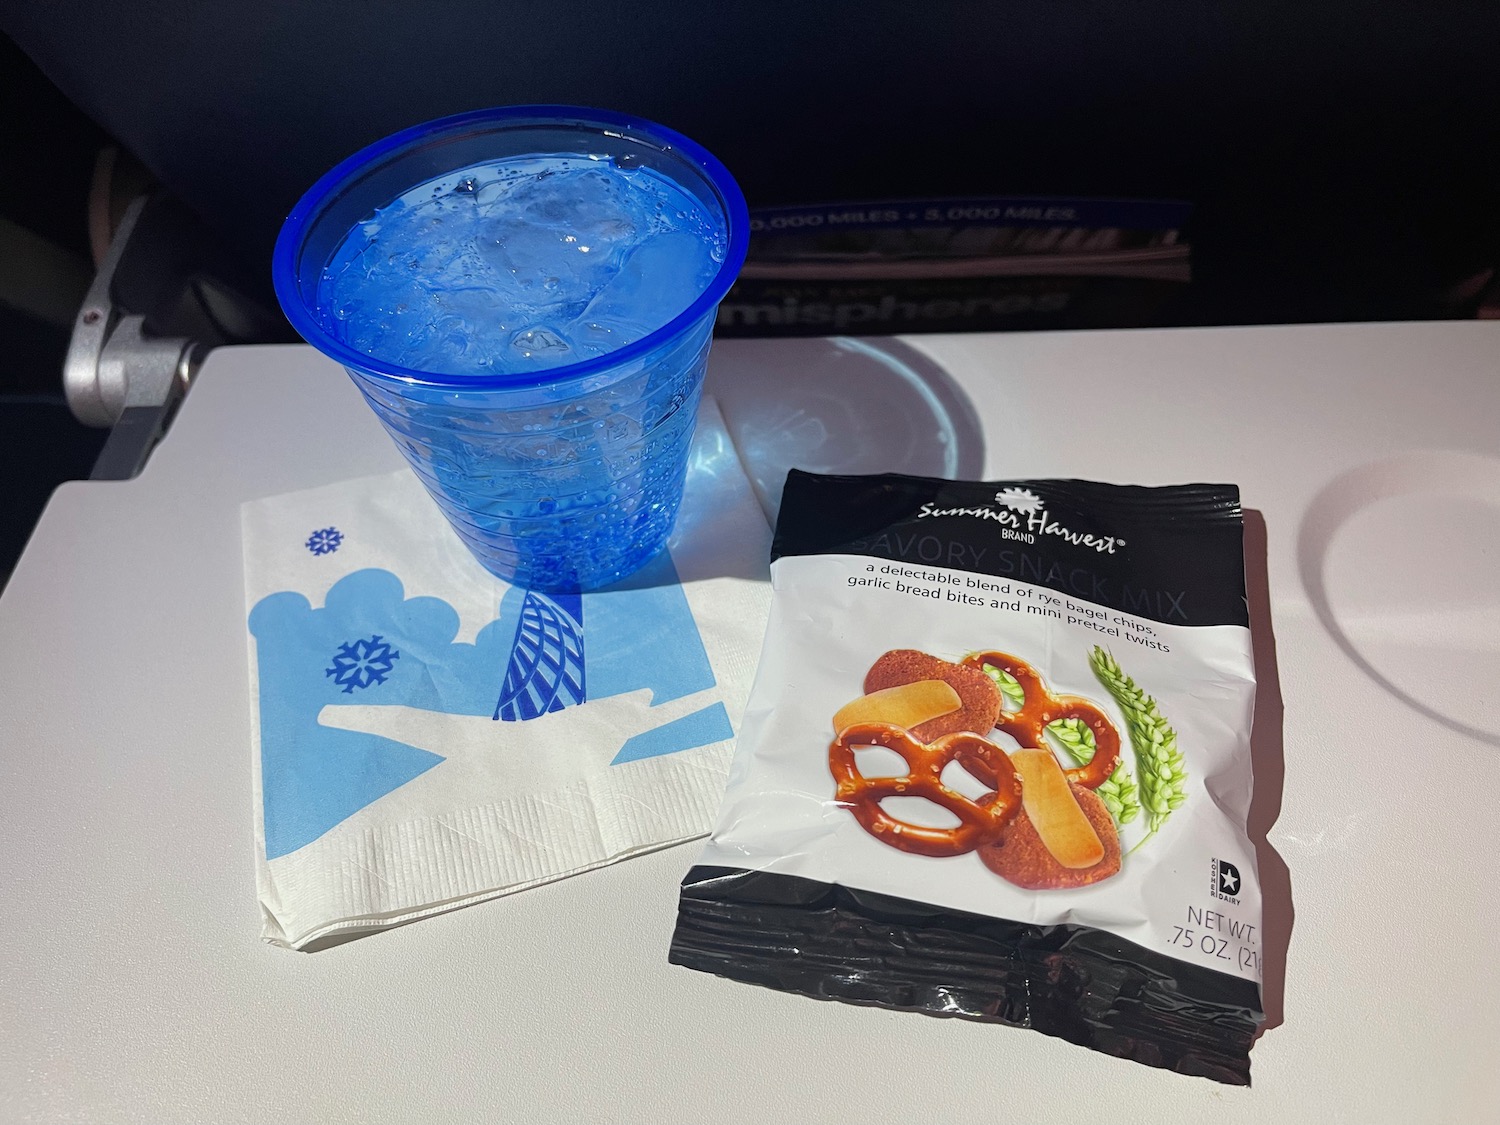 a blue cup and a bag of pretzels on a white surface